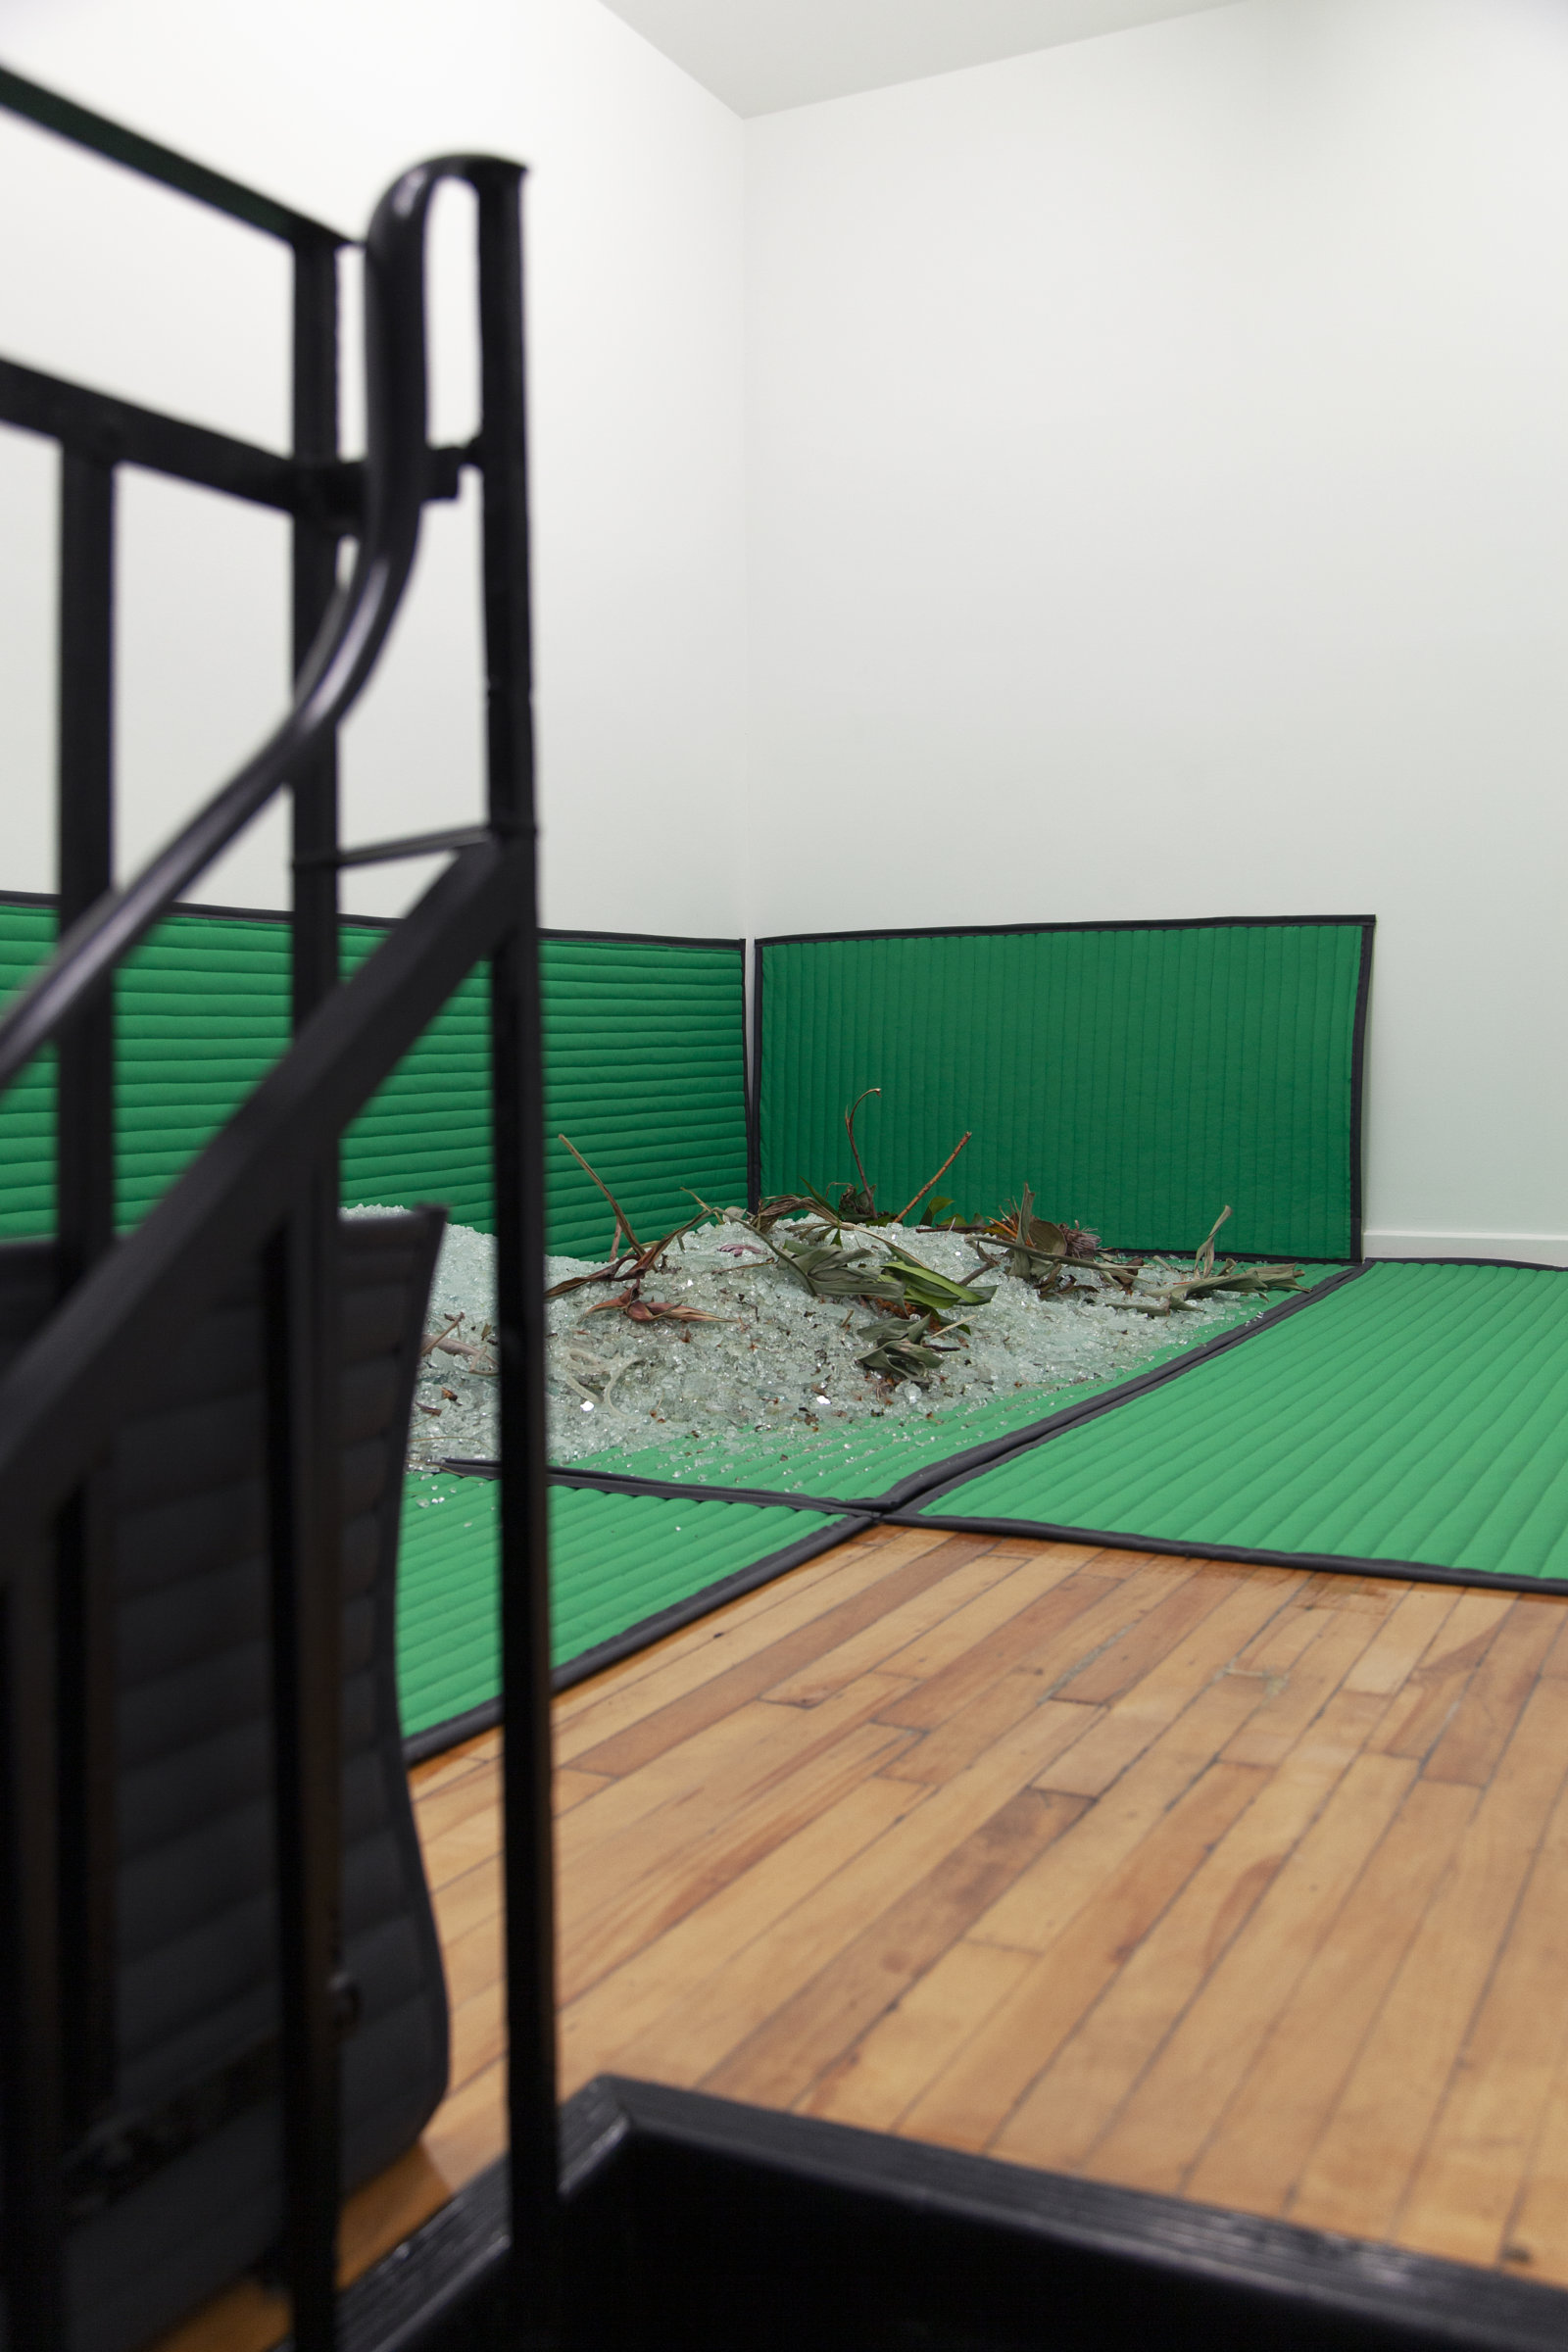 Abbas Akhavan, untitled, 2020, heavy-duty vinyl-reinforced polyester, quilt batting, tropical plants, glass, installation dimensions variable. Installation view, Parc Offsite, Montreal, Canada, 2020